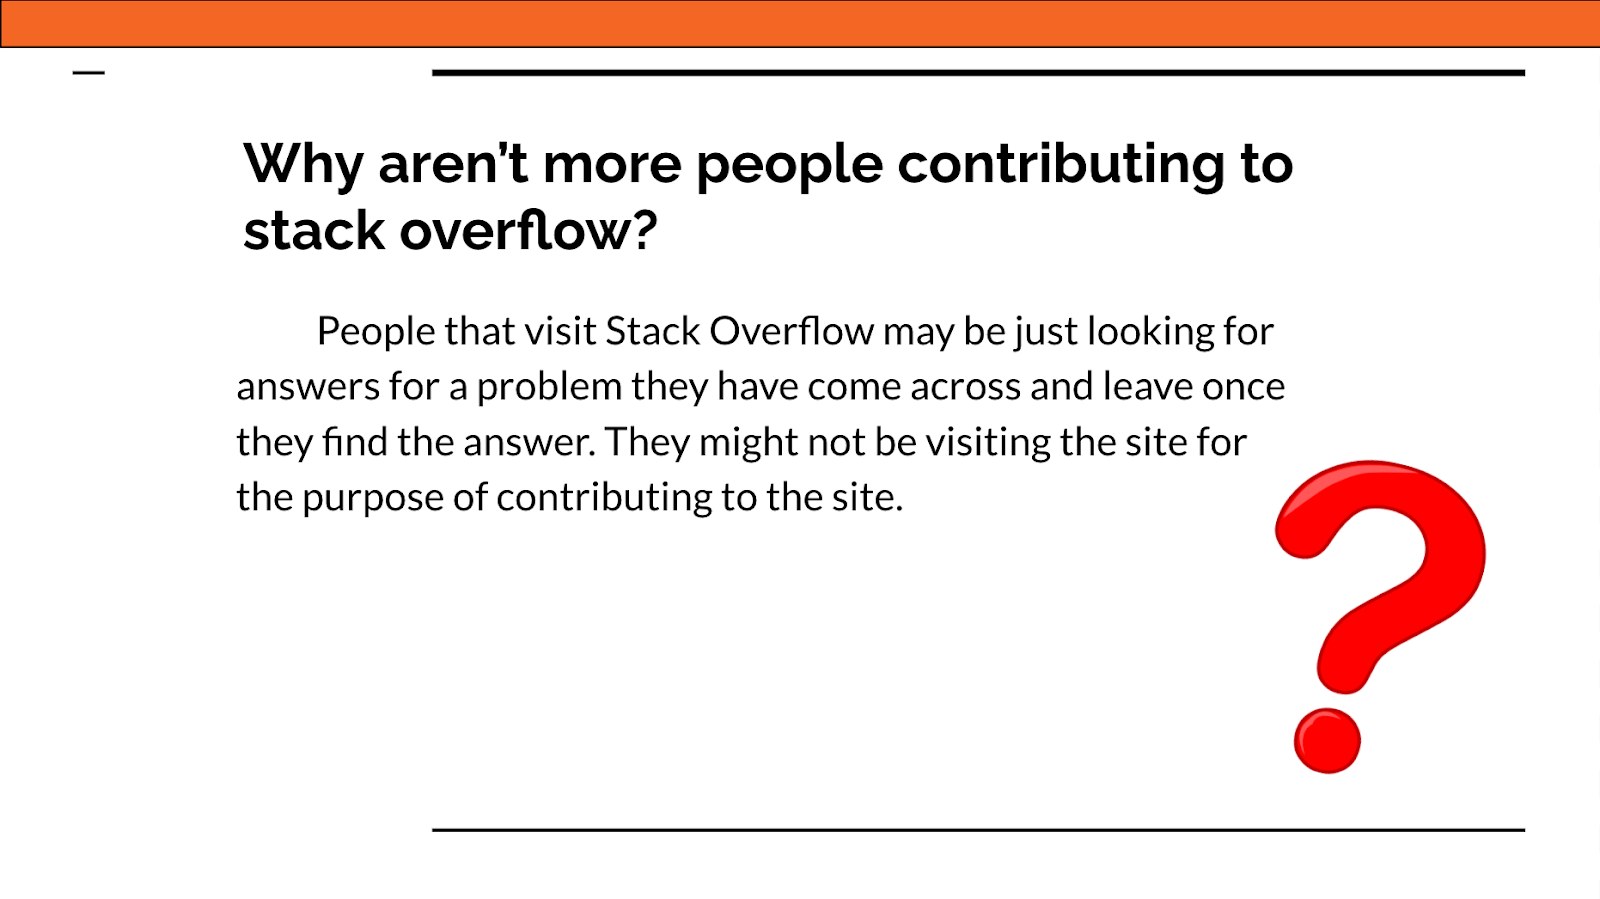 Why aren't more people contributing to Stack Overflow? People that visit Stack Overflow may be just looking for answers for a problem they have come across and leave once they find they answer. They might not be visiting the site for the purpose of contributing to the site. 